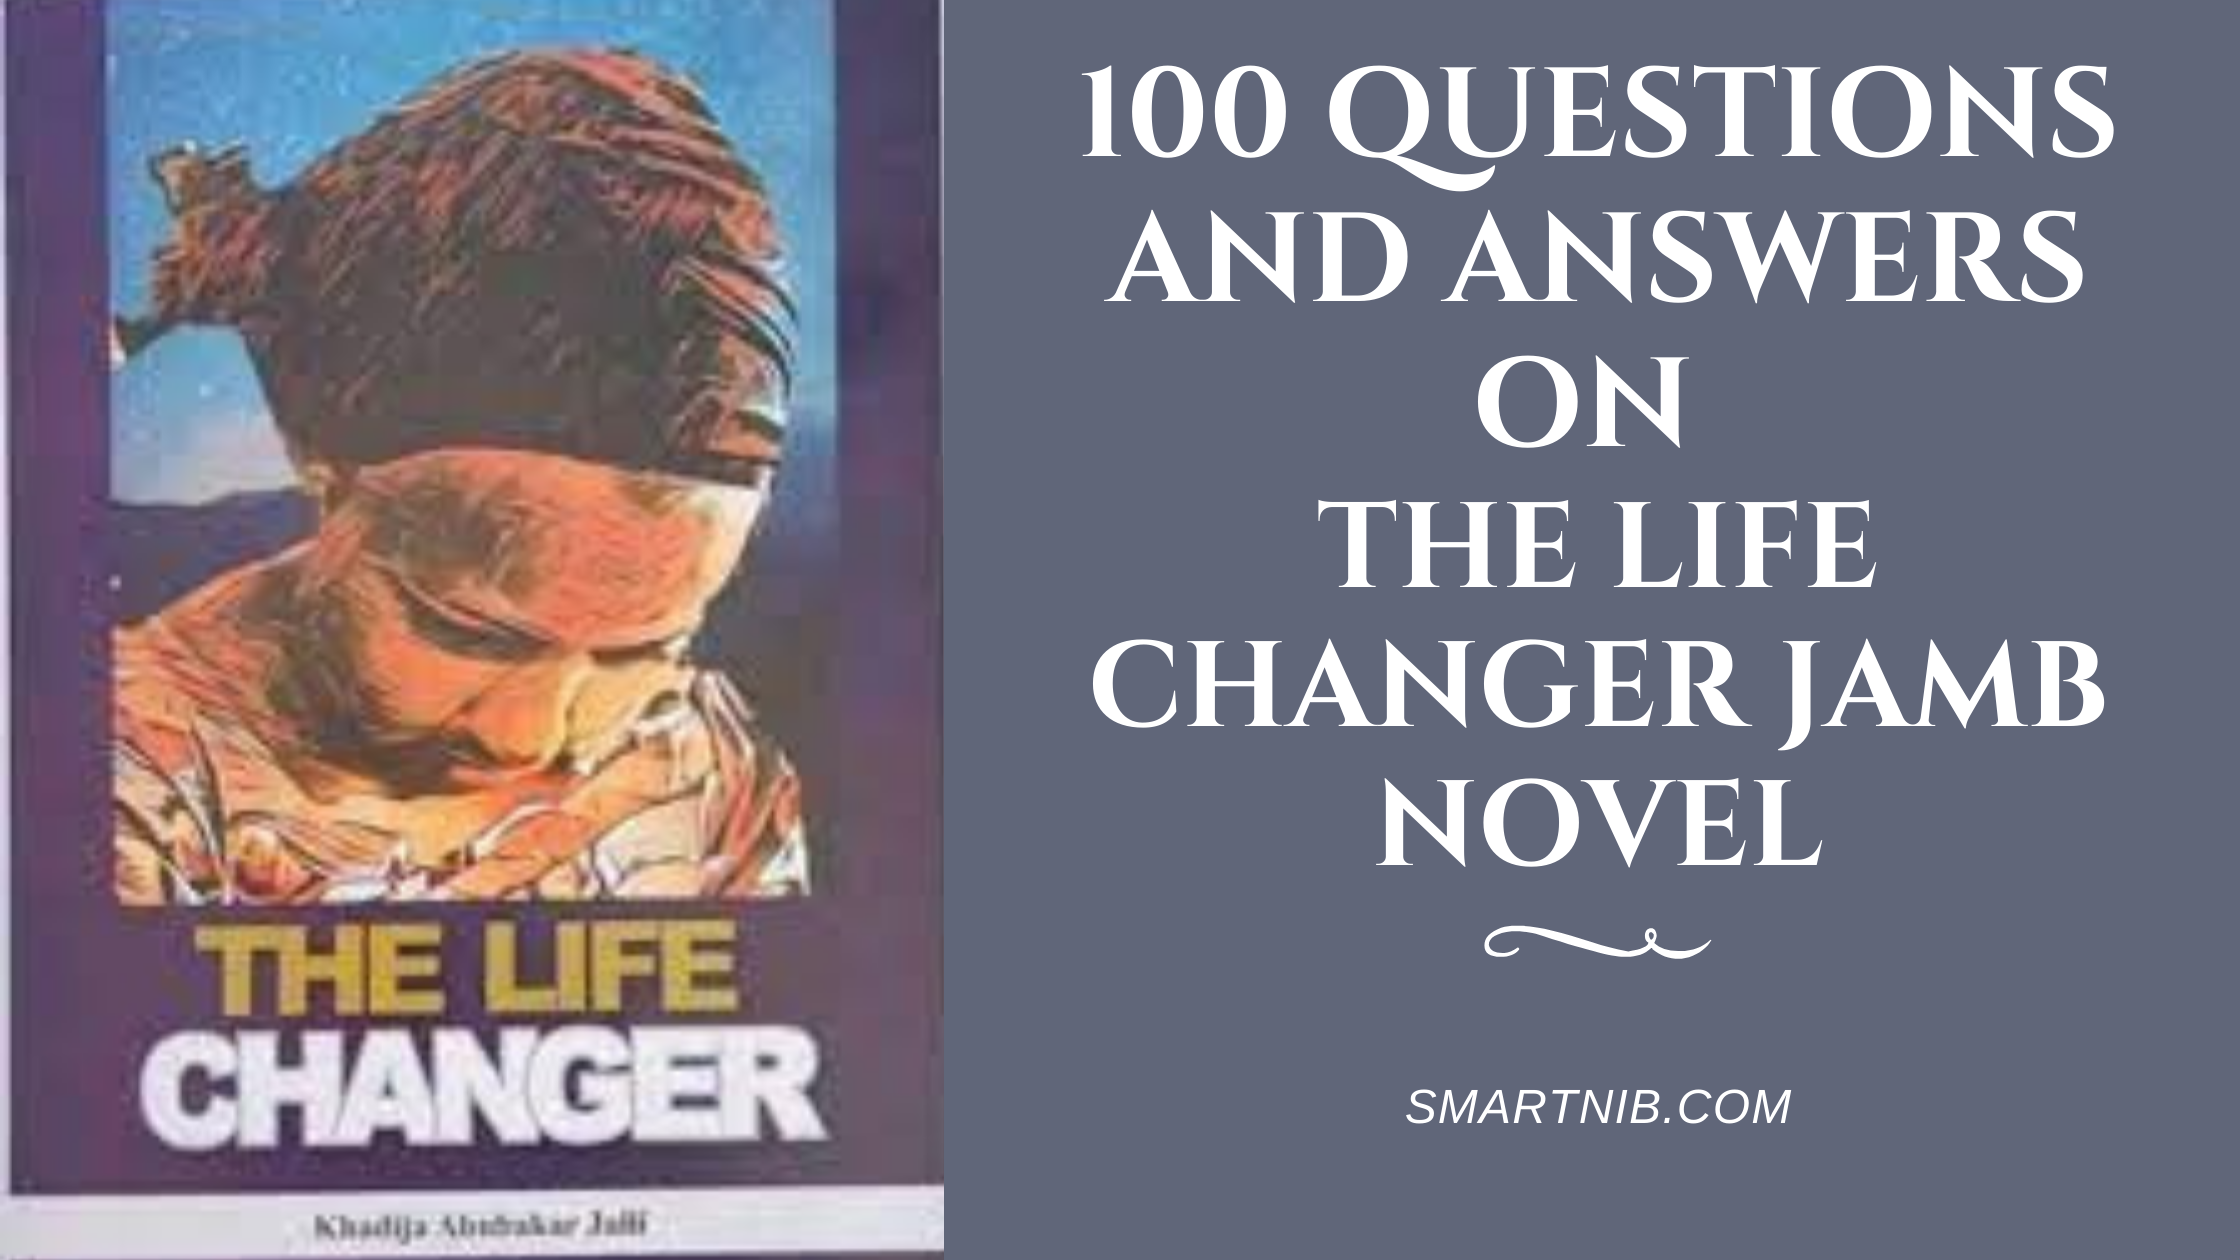 100 Questions And Answers On The Life Changer JAMB Novel